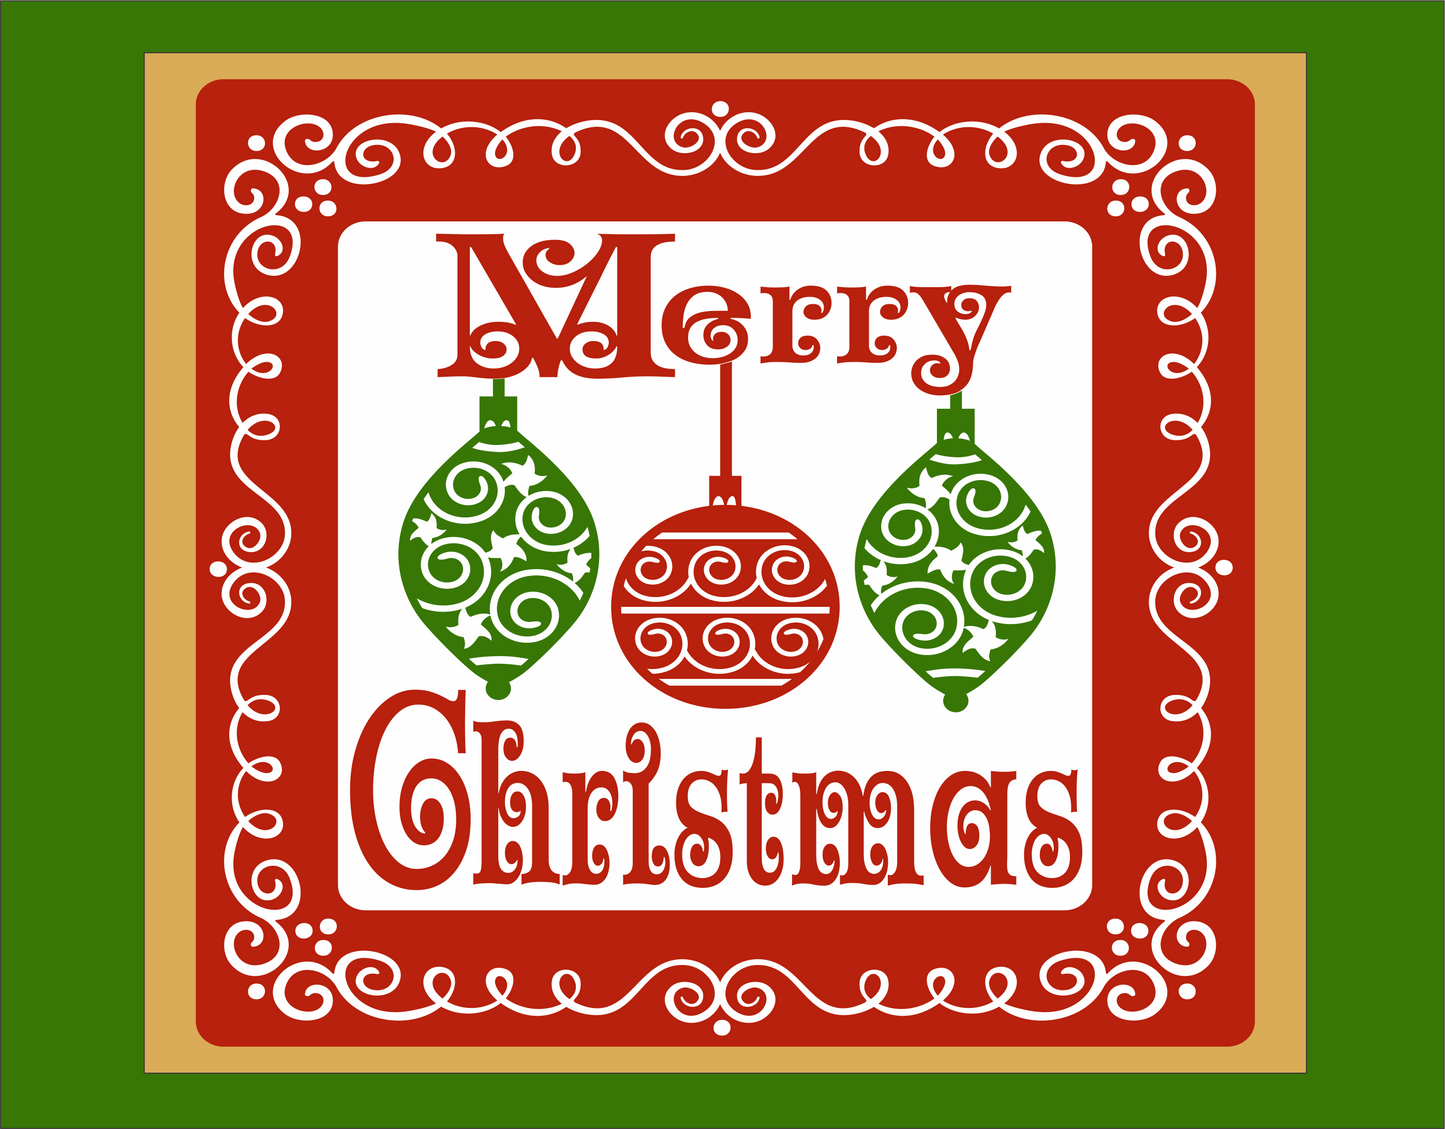 Merry Christmas Hanging Ornaments sign